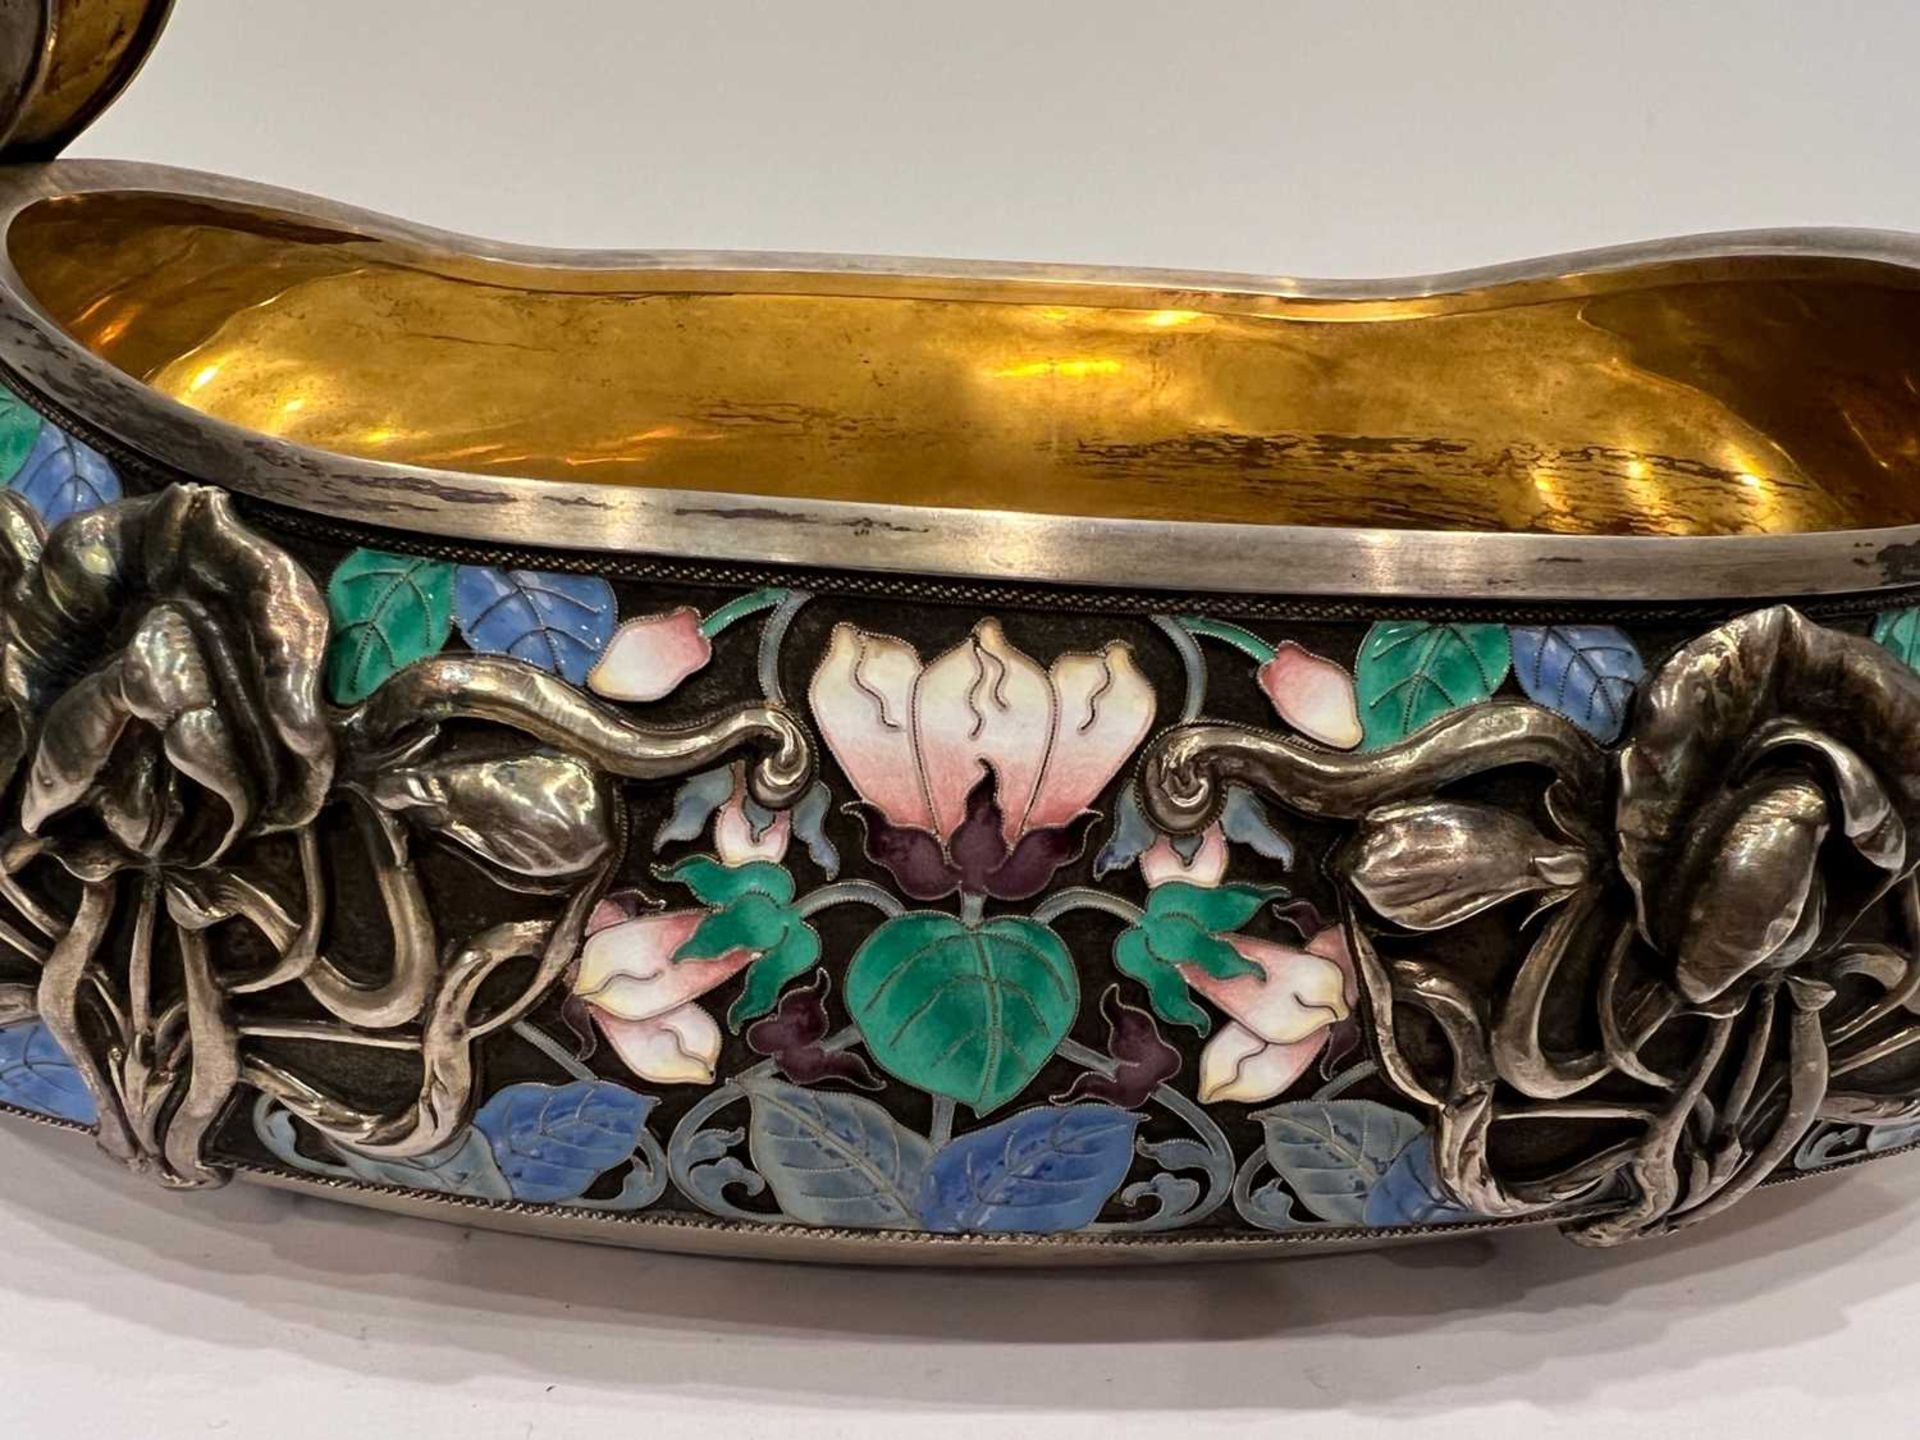 A MASSIVE EARLY 20TH CENTURY RUSSIAN SILVER AND ENAMEL KOVSH IN THE FORM OF A SWAN - Image 10 of 28